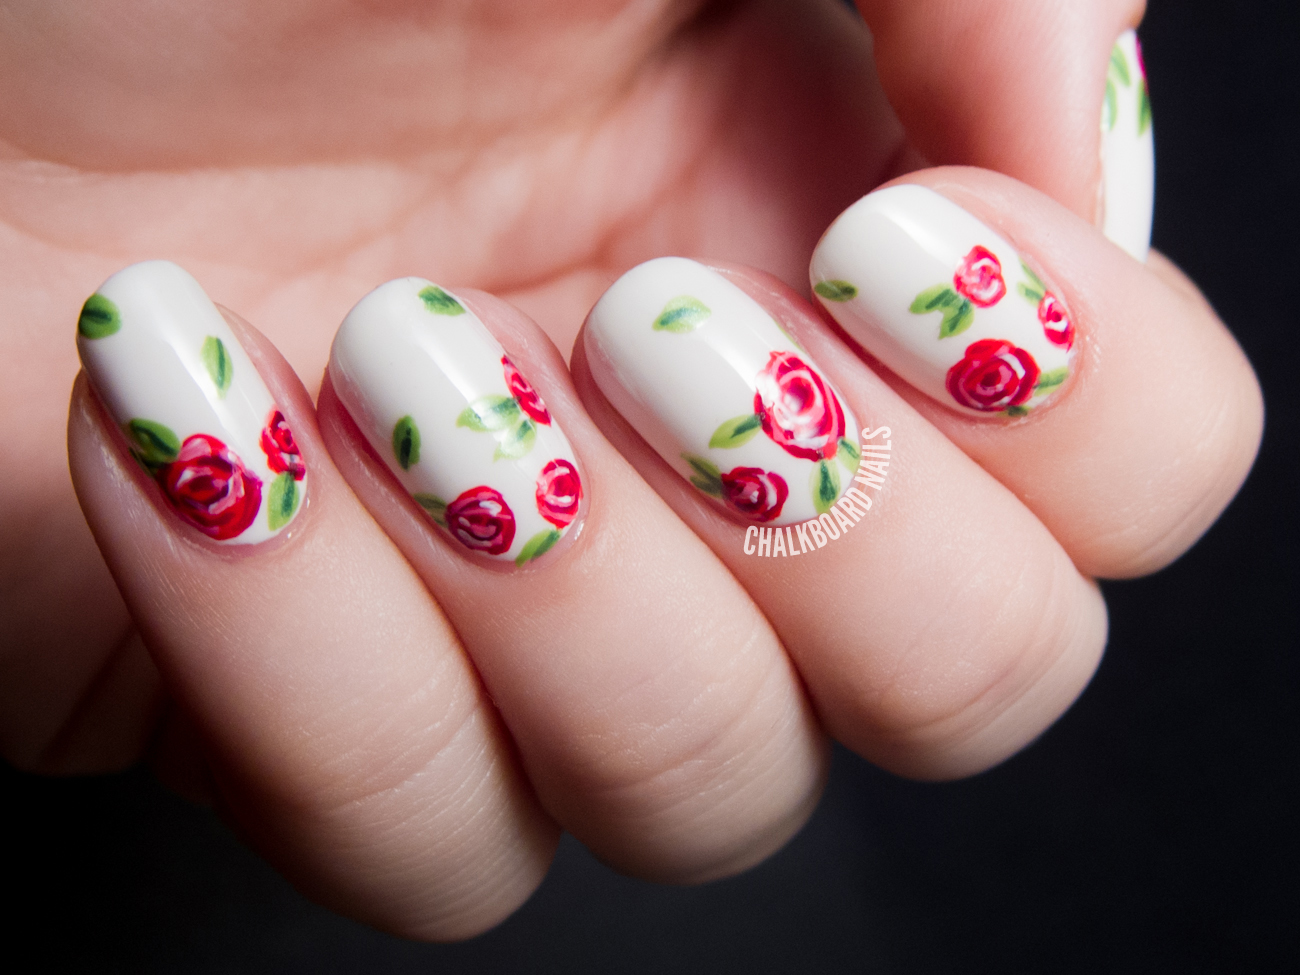 2. How to Create an Airbrushed Rose Nail Design - wide 8